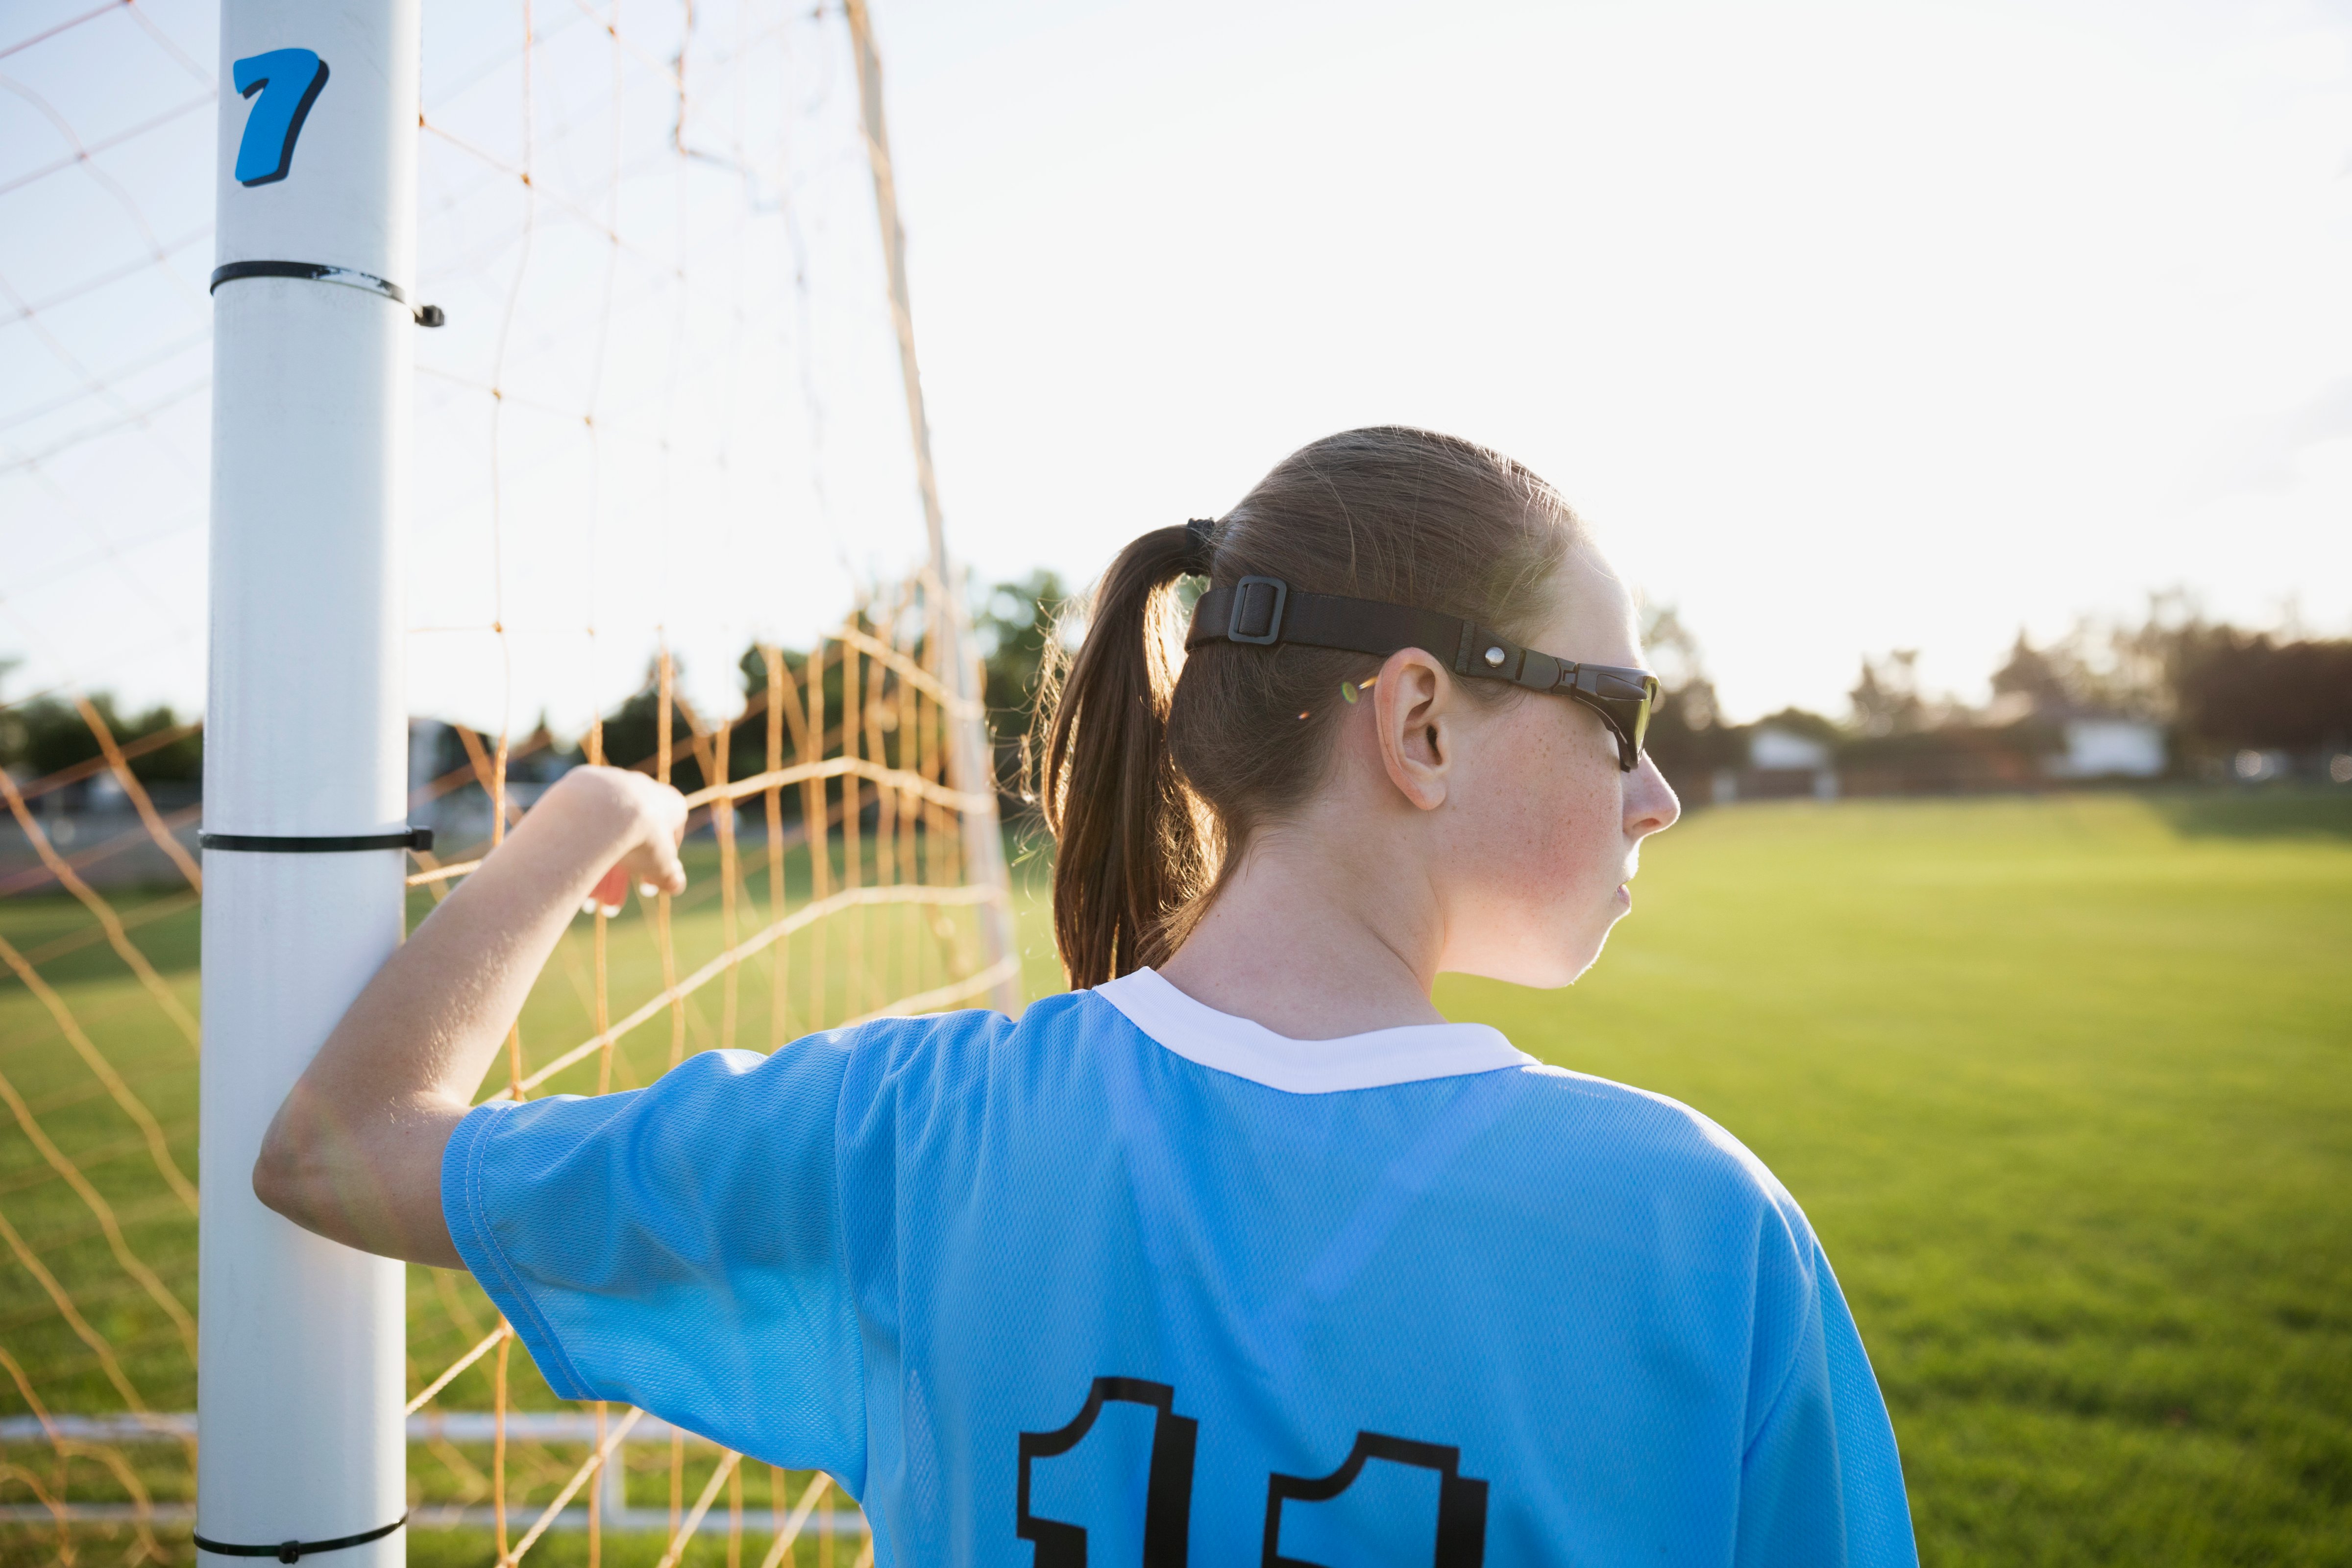 Middle school girl soccer player leaning on goal net post looking away